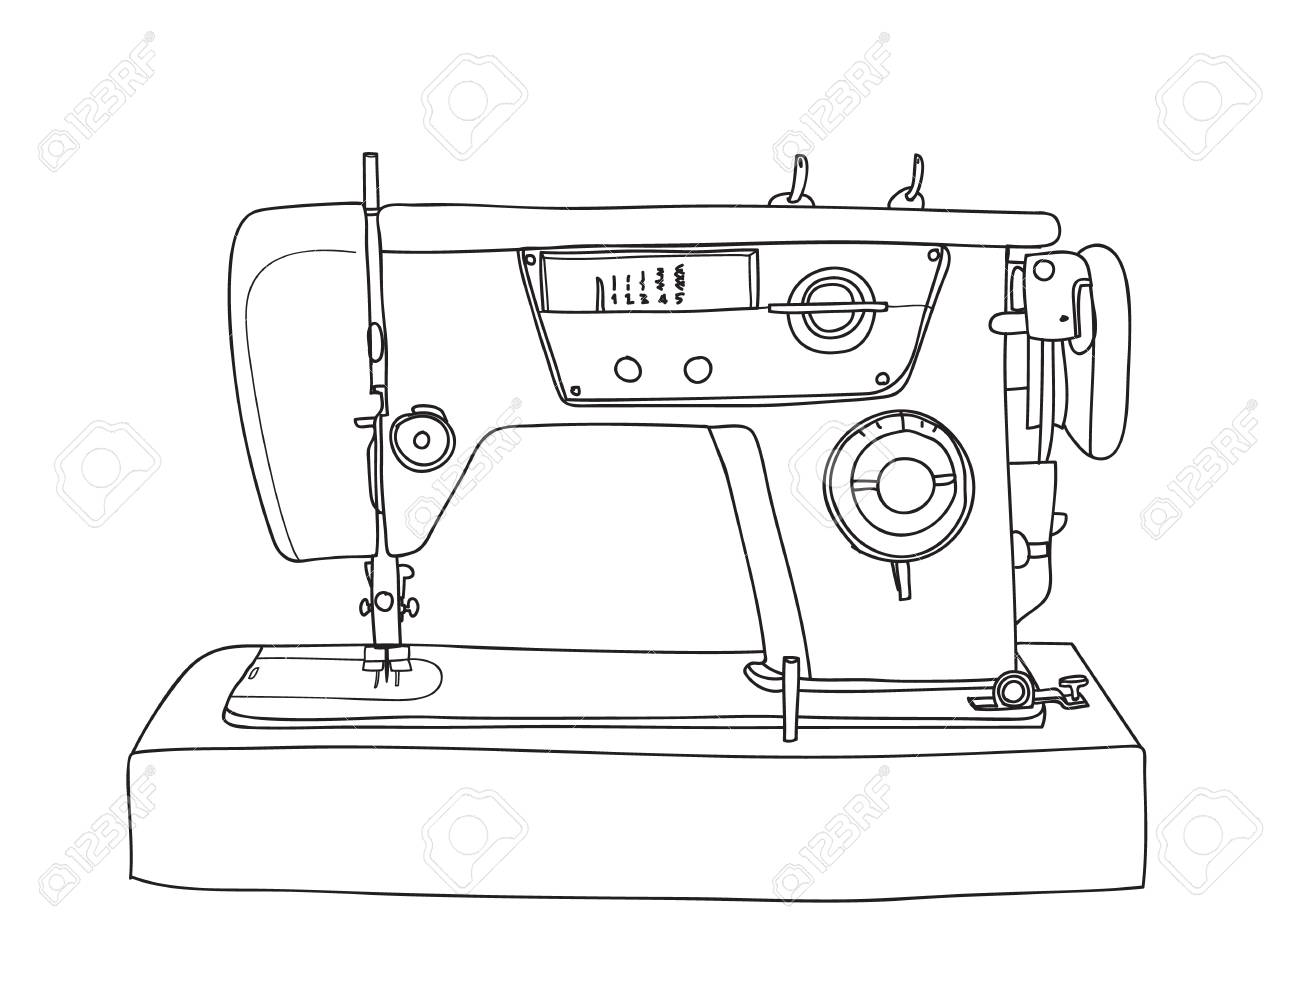 New Machine Sketch Drawing for Kids